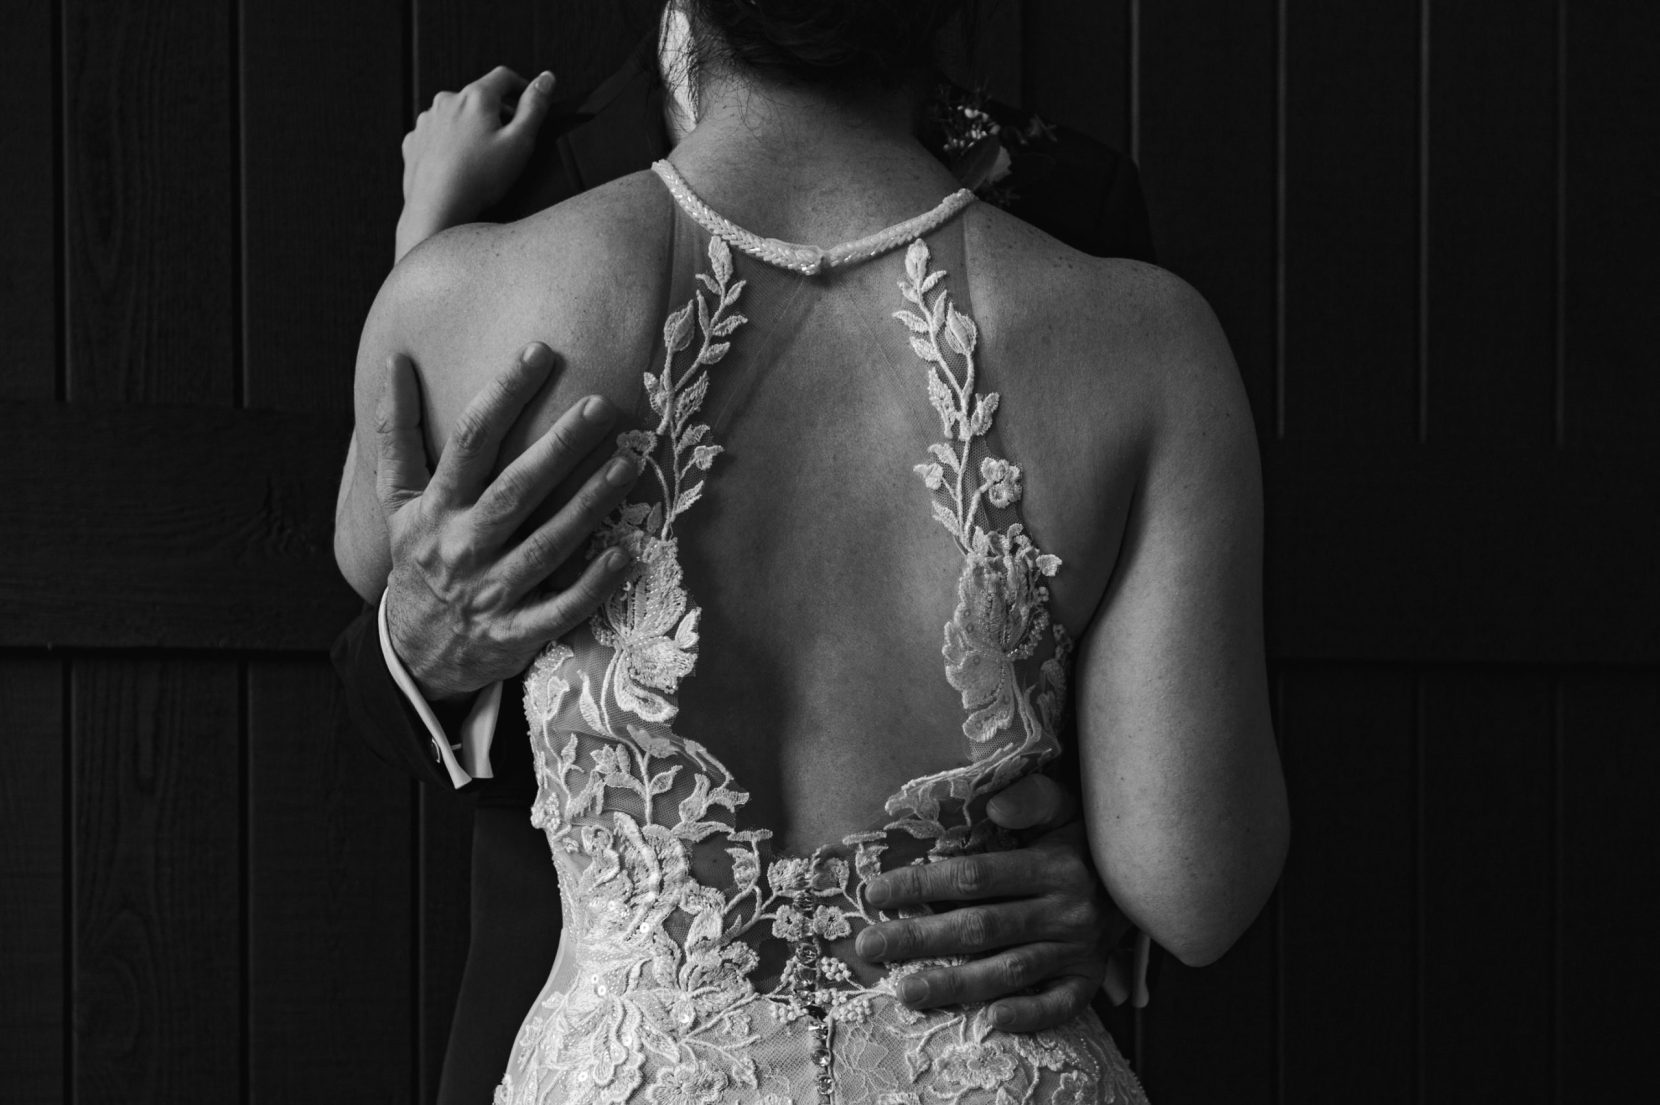 wedding dress lace detail grooms hands portrait black and white